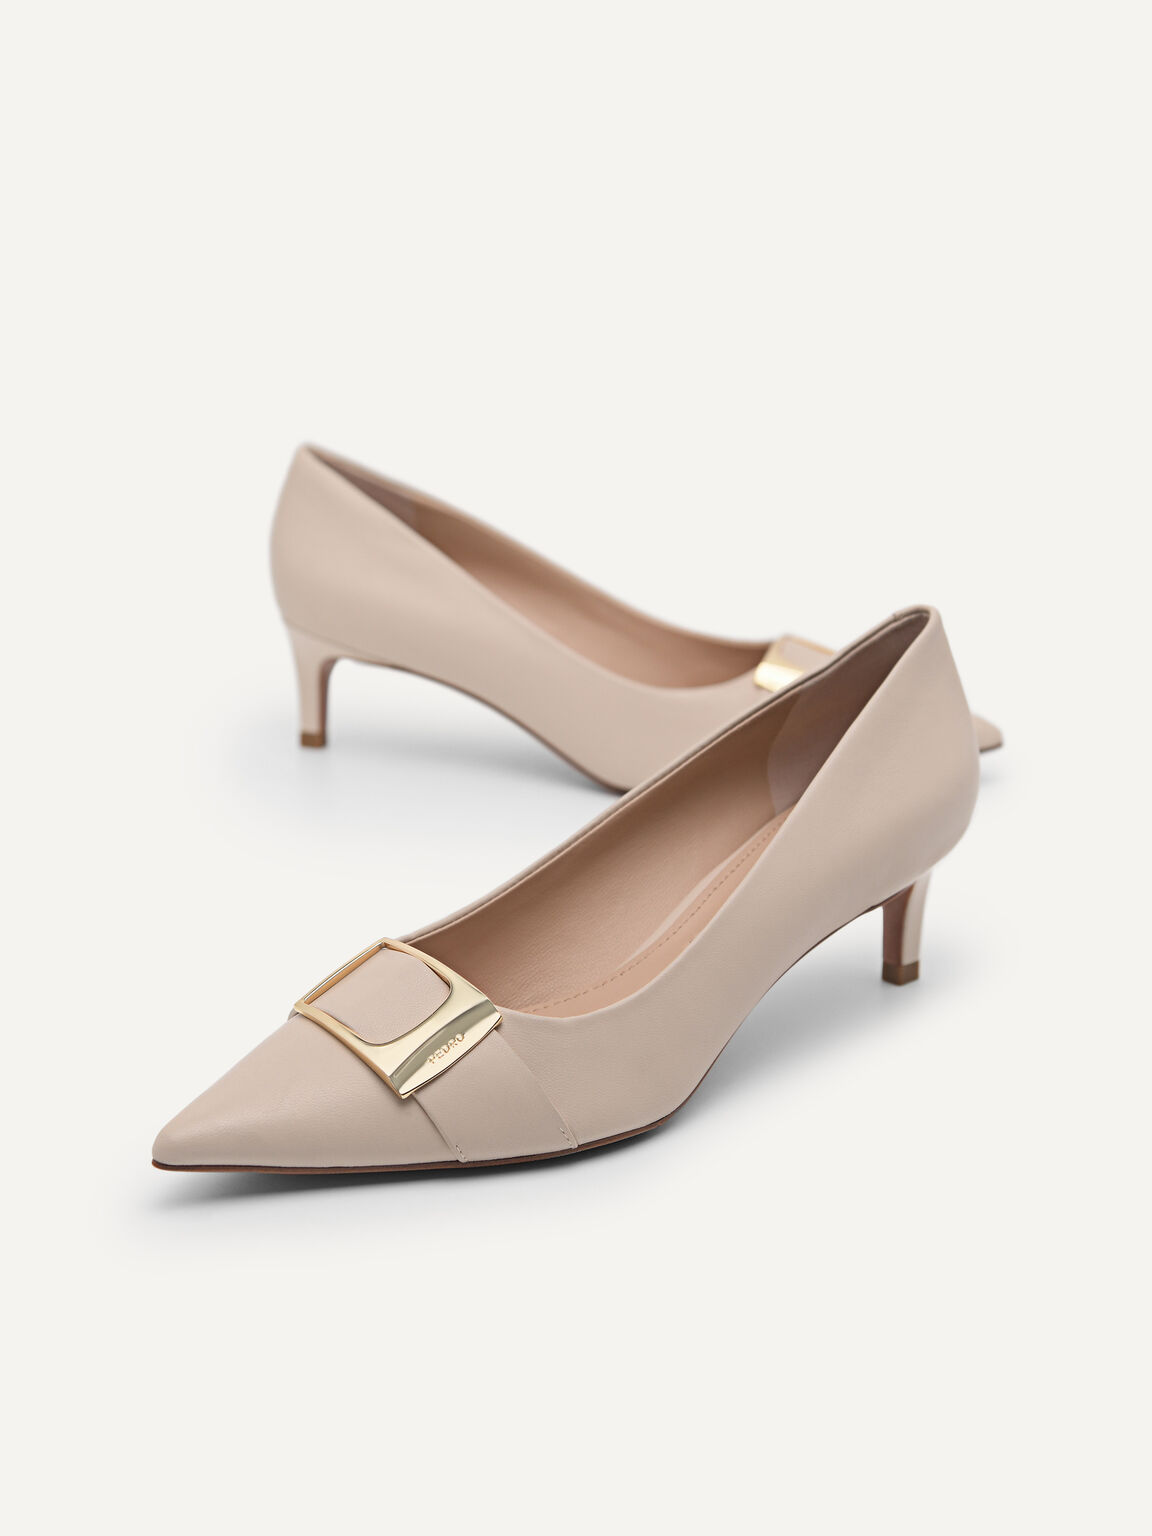 Leather Kitten Pumps, Nude, hi-res